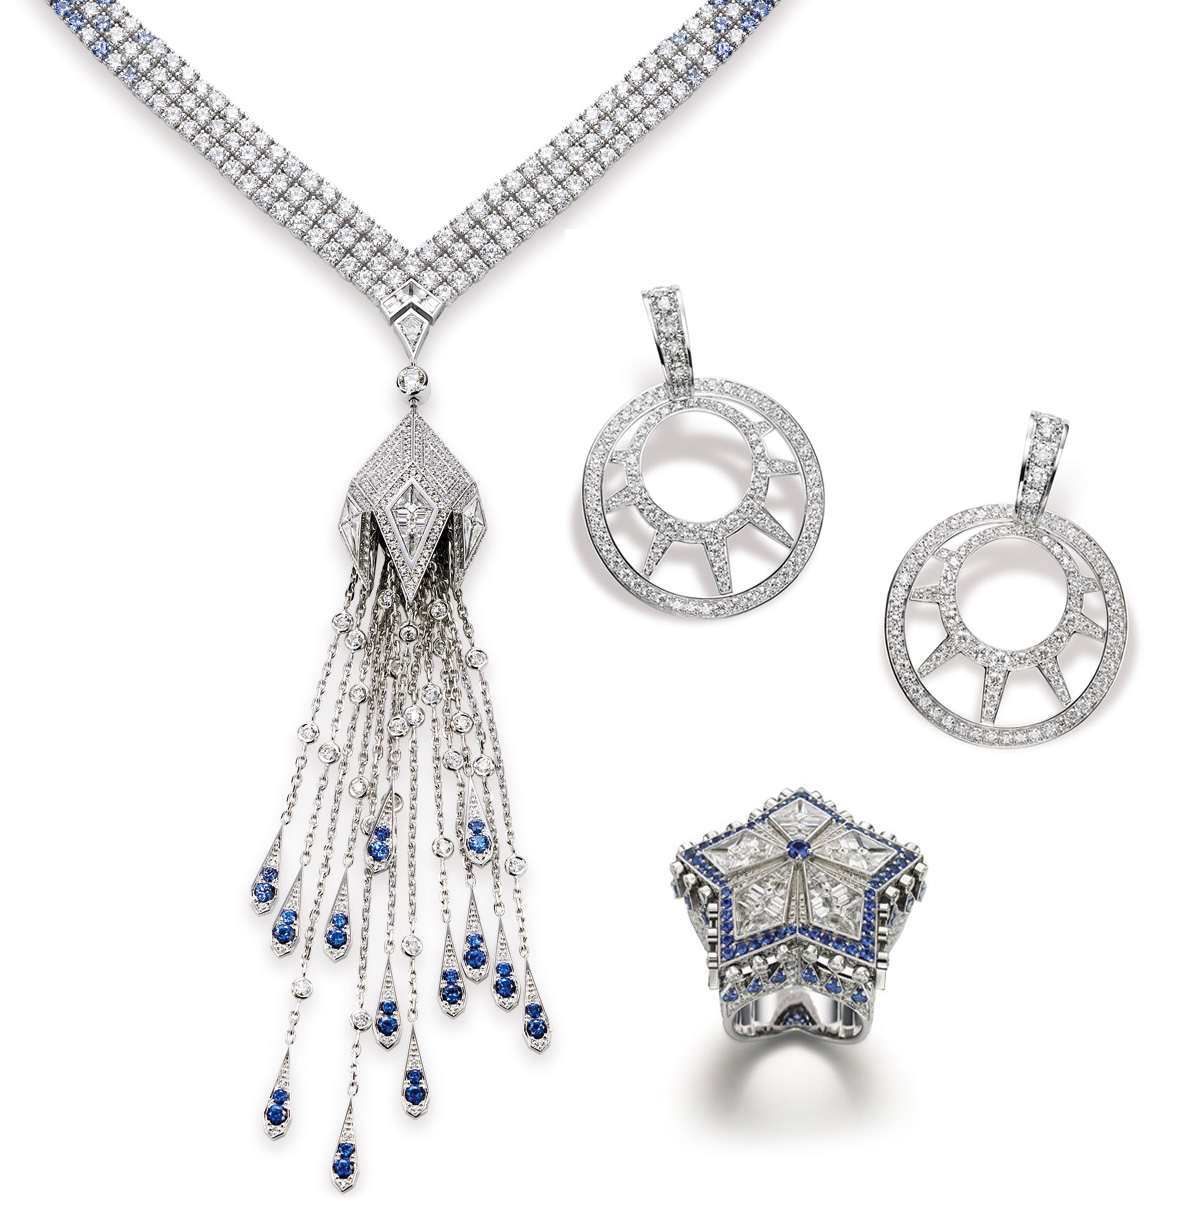 A few pieces from Piaget Limelight New-York Paris collection